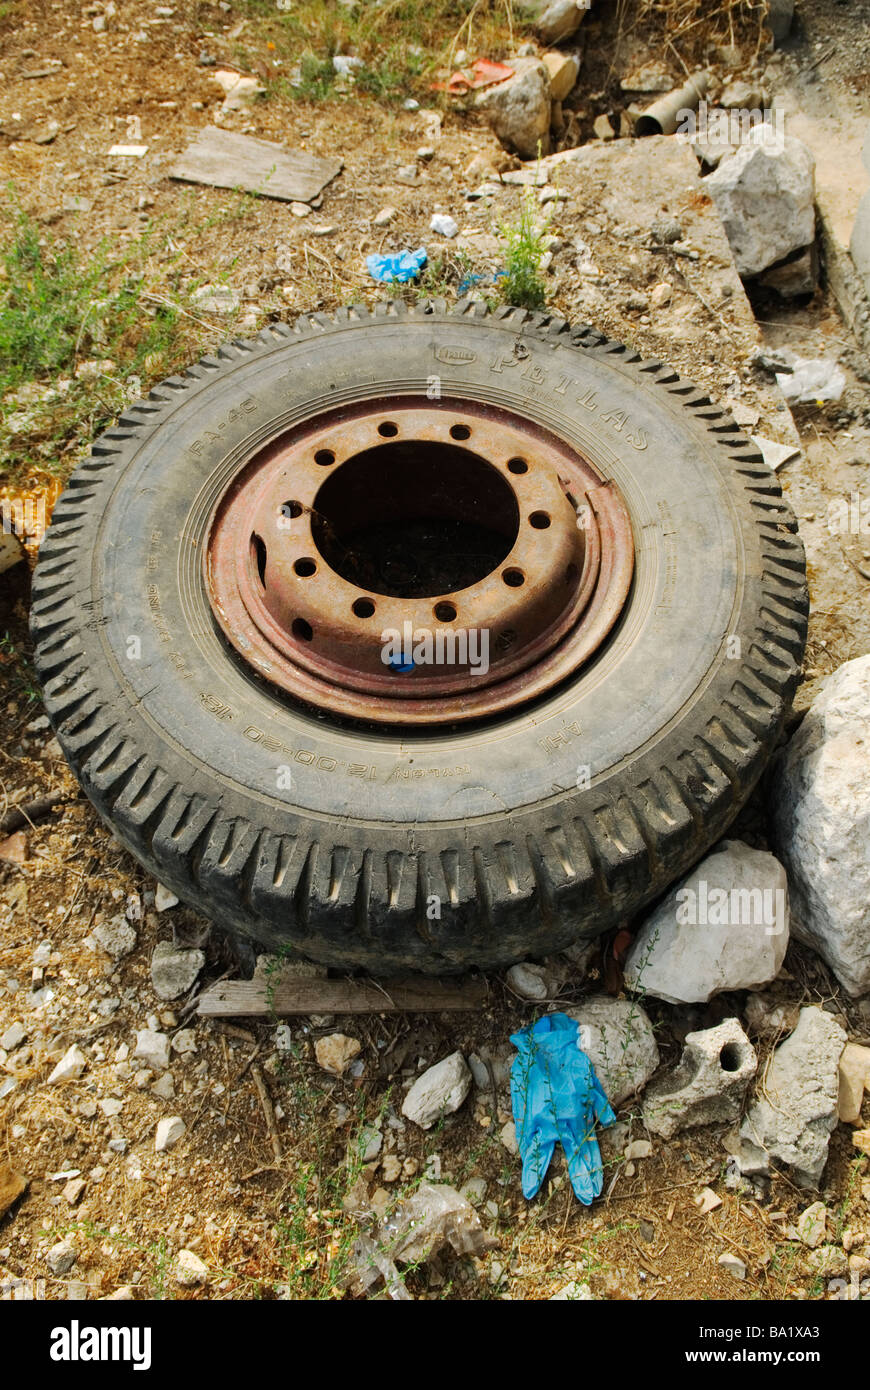 Discarded truck rubber tire Stock Photo